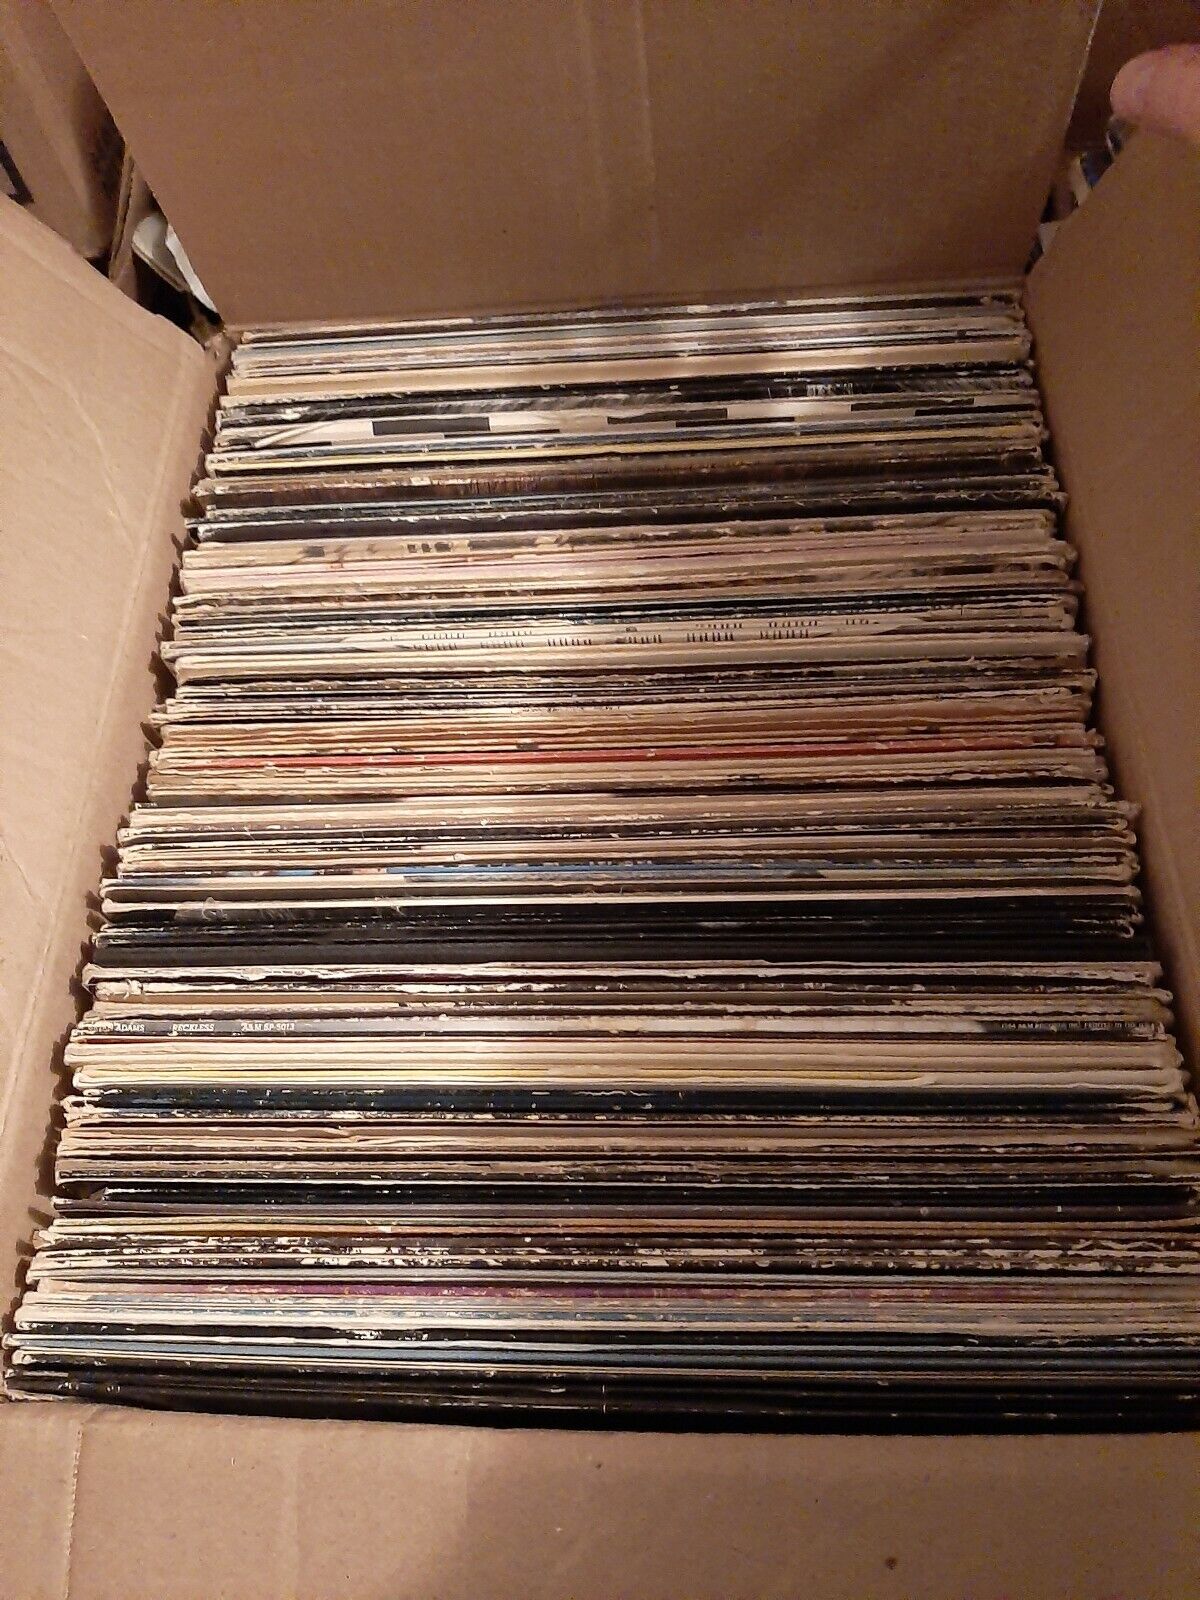 Lot Of 10 Classic Rock 12 Inch LPs Full Albums. Lowered Price To Sell Wont Last